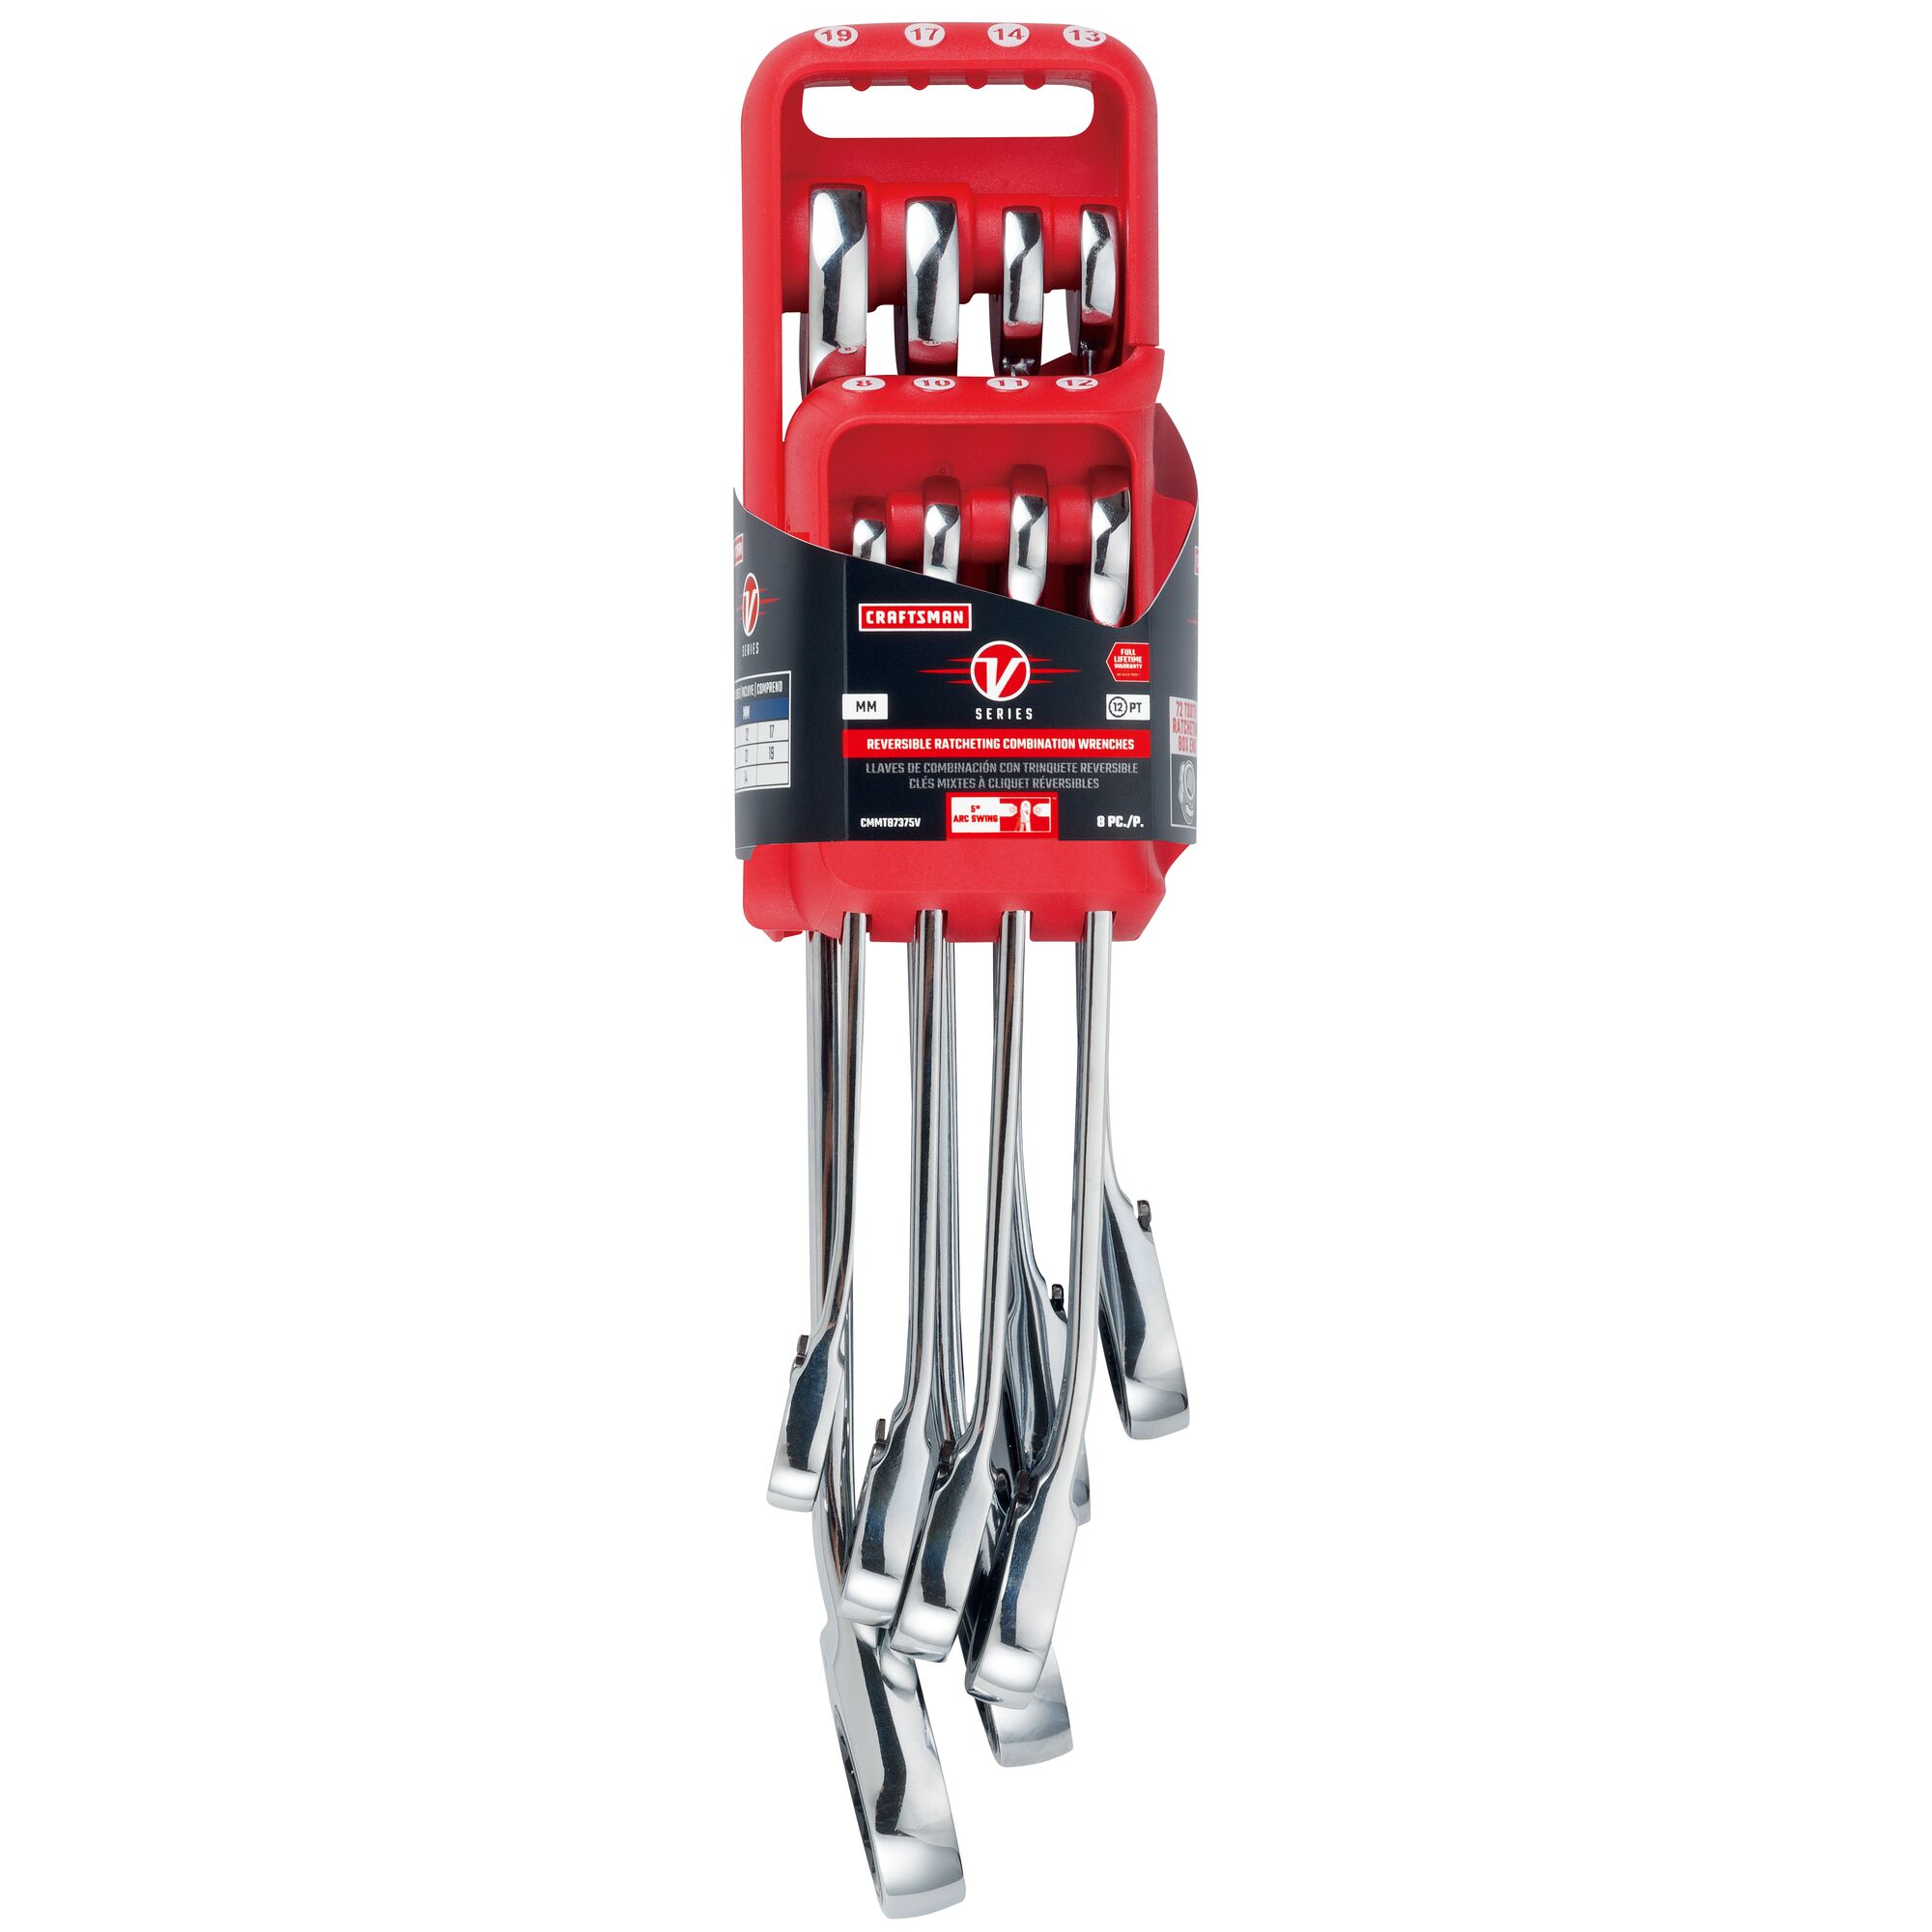 V series metric reversible ratcheting combination wrench set (8 piece) in packaging.